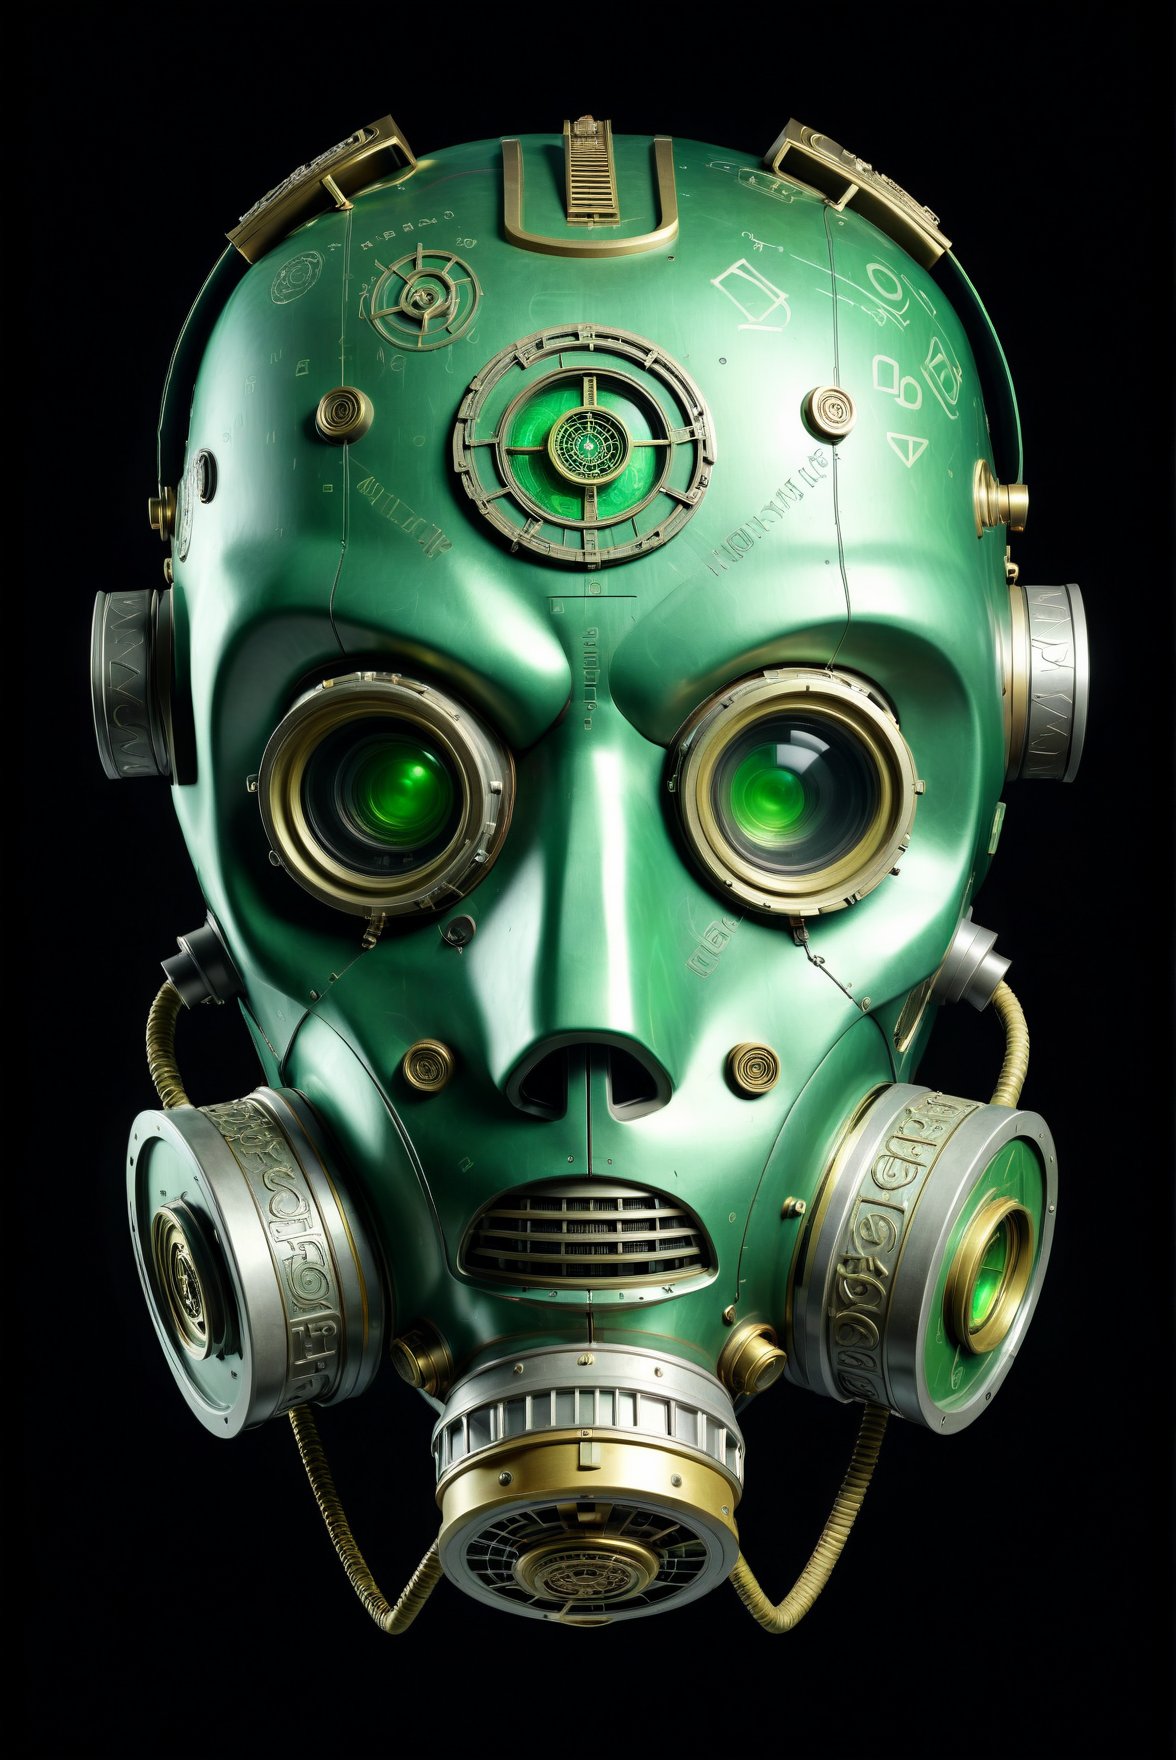 A colossal robot head adorned with ancient scrolls and glyphs. Its metallic surface seems to hold countless stories and forgotten knowledge.   ,wearing a tactical gas mask. The mask is constructed from a dark, matte composite material with a sleek, angular design. Glowing green orbs embedded within its face scan and analyze the environment,  preserving information for future generations.